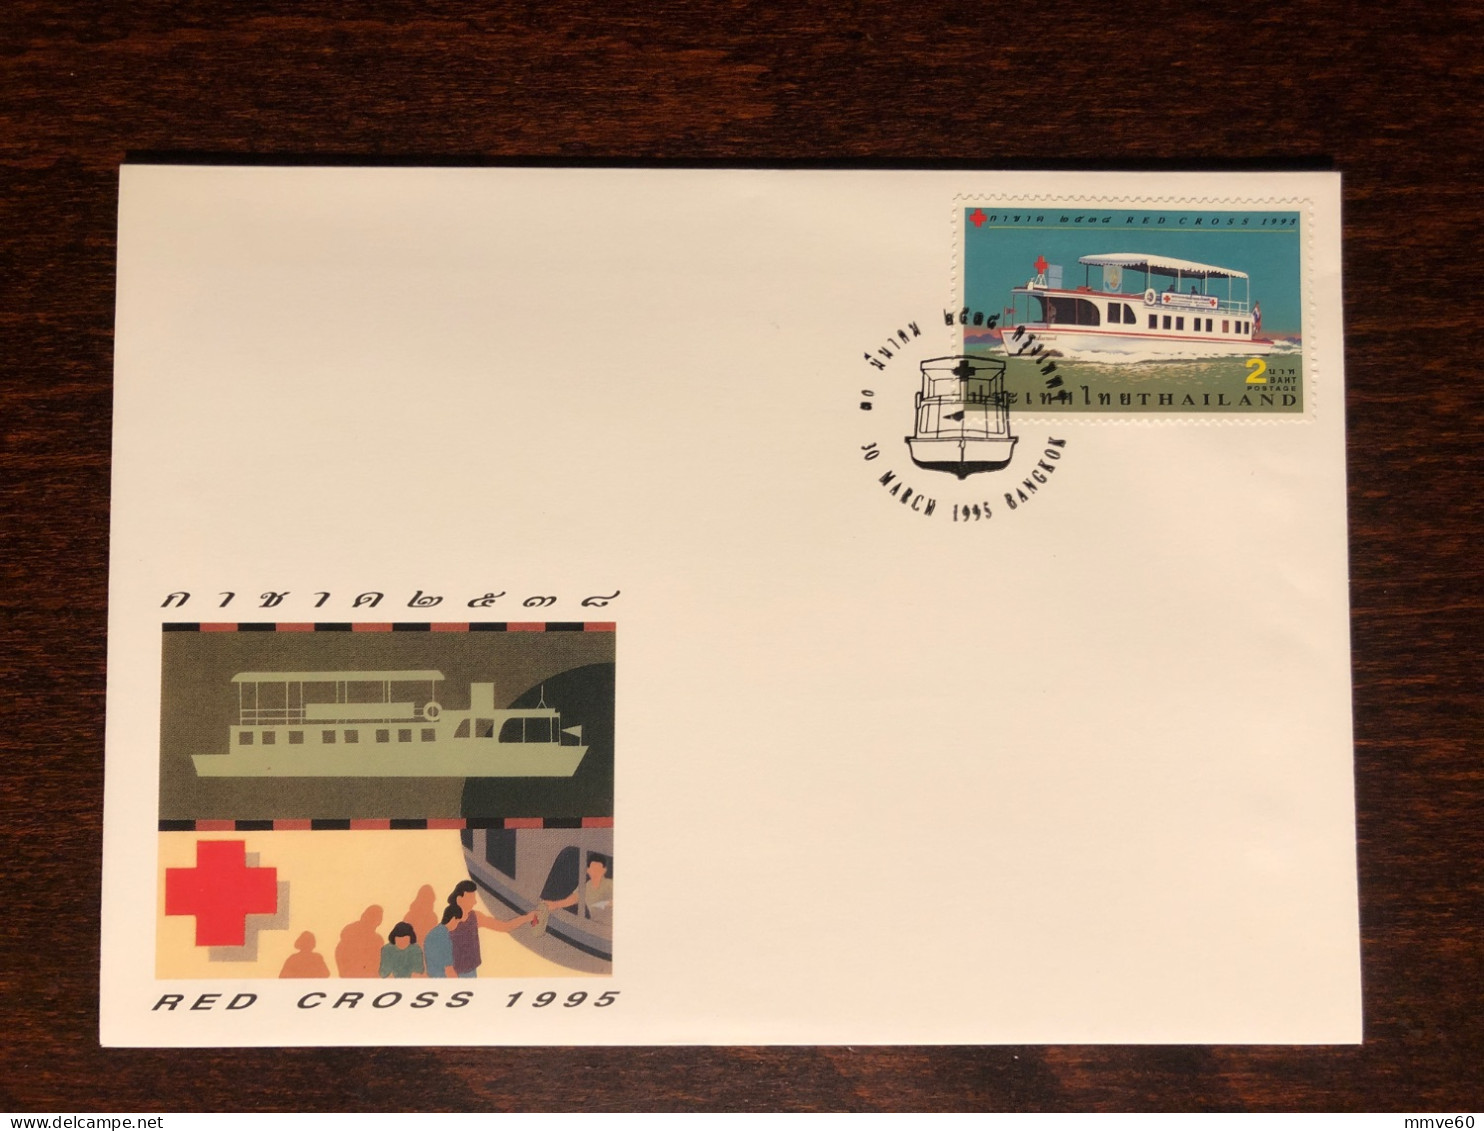 THAILAND FDC COVER 1995 YEAR RED CROSS HEALTH MEDICINE STAMPS - Tailandia